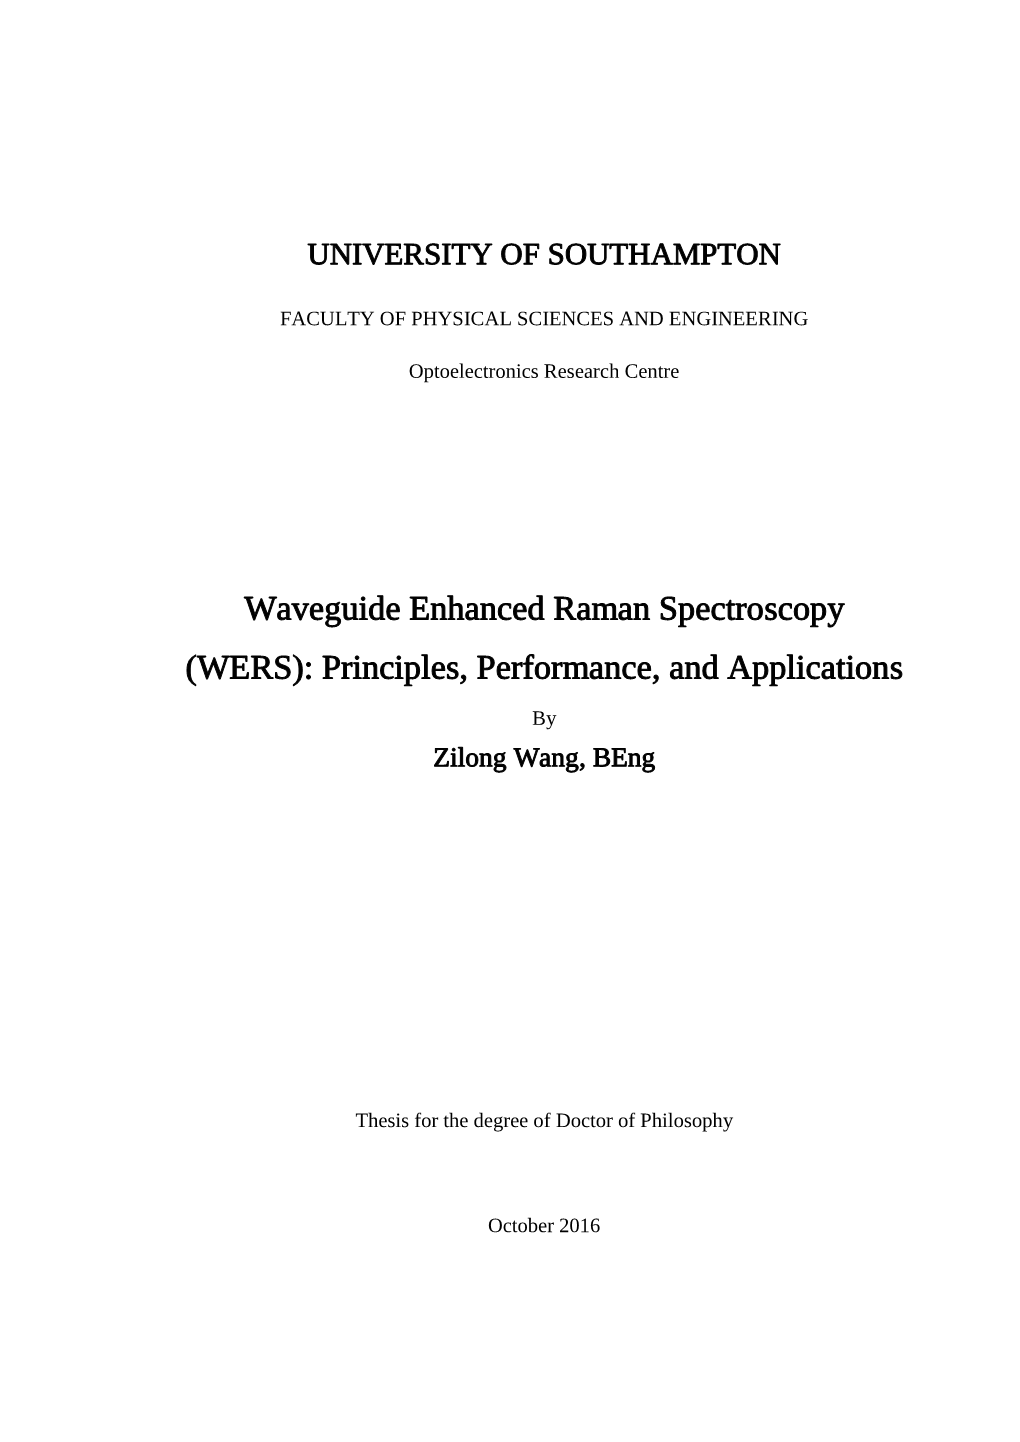 Waveguide Enhanced Raman Spectroscopy (WERS): Principles, Performance, and Applications